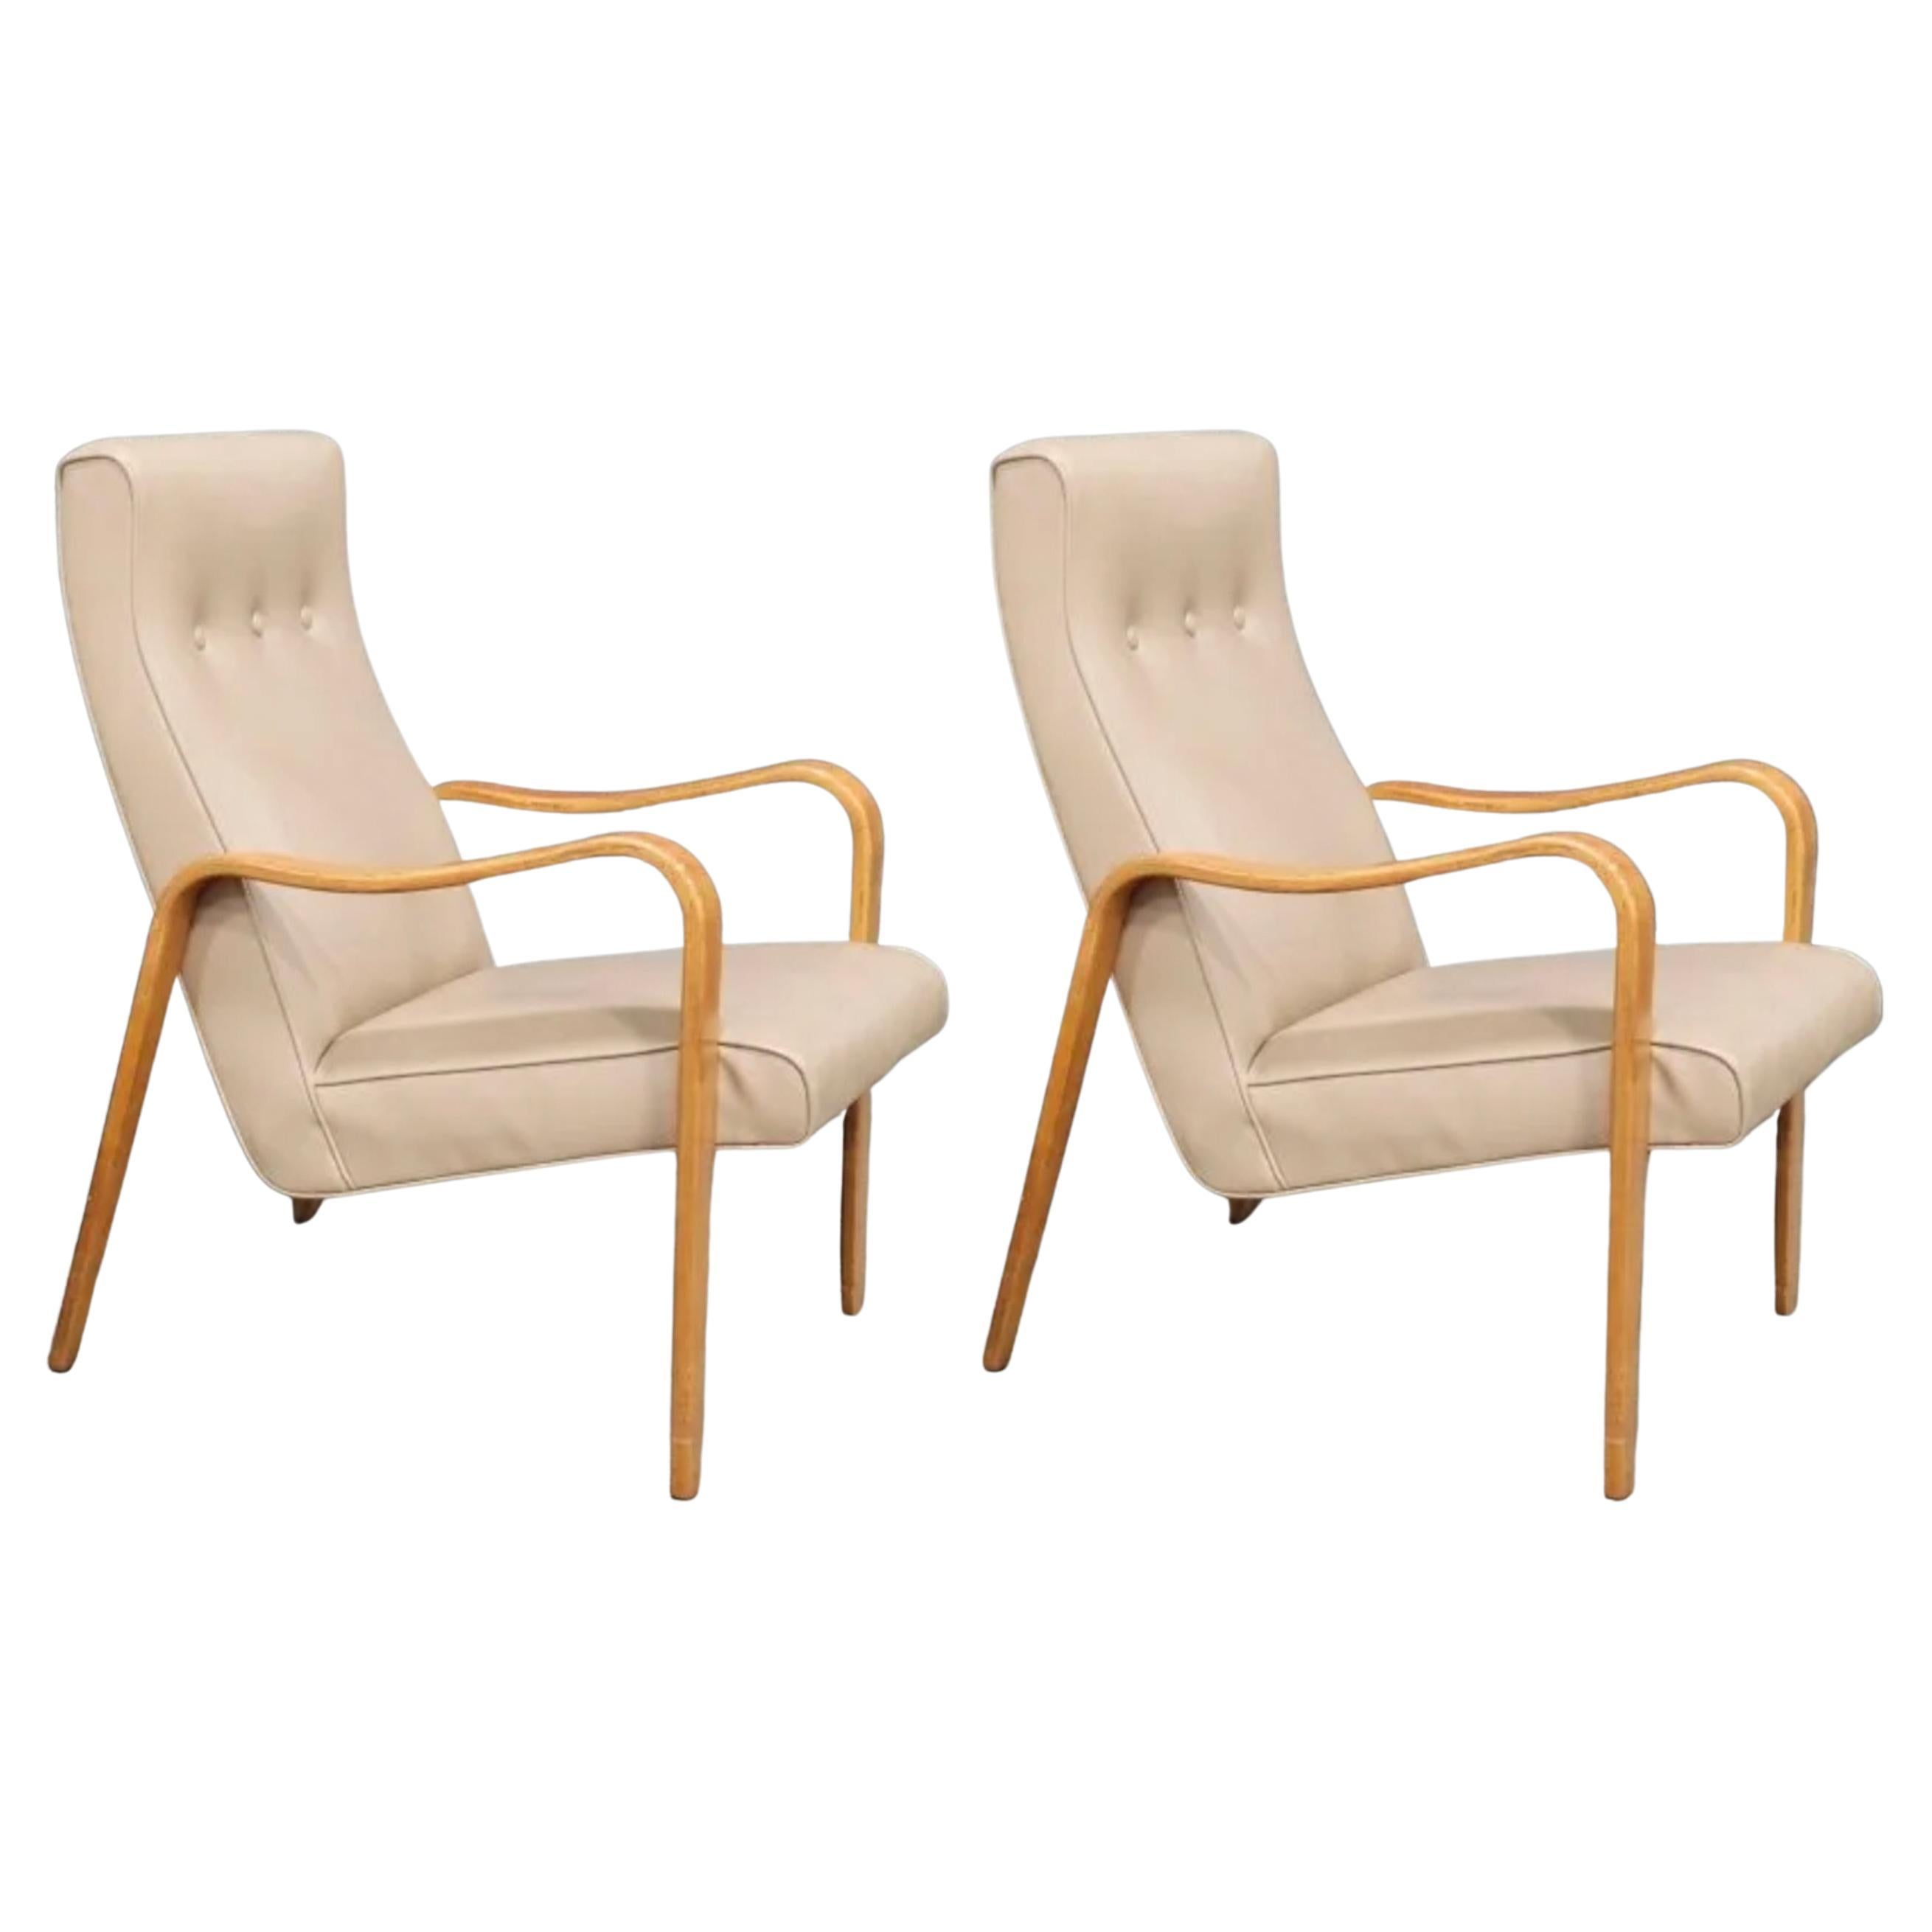 Woodwork Pair of Mid-Century Modern Thonet Bentwood Birch Lounge Arm Chairs Tan For Sale